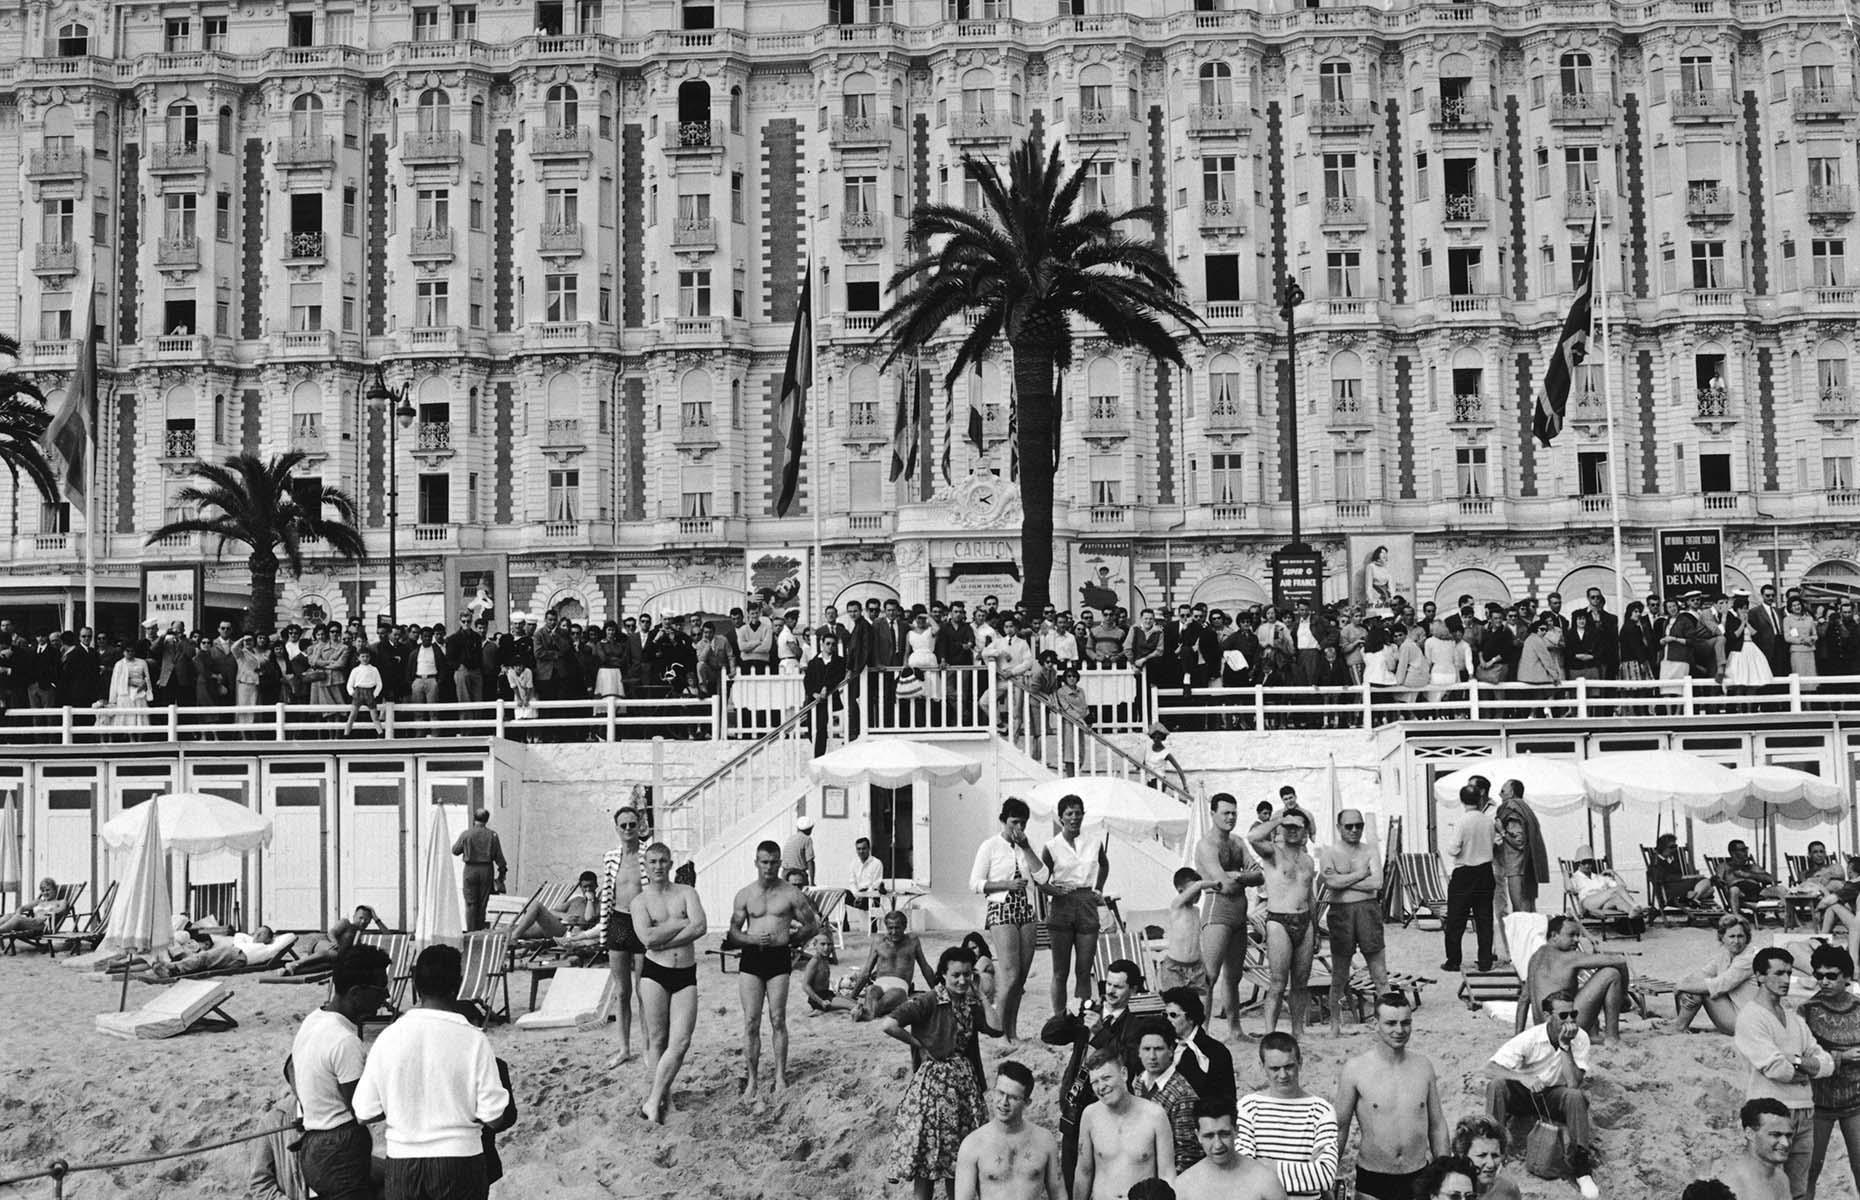 During the Second World War, many of the French Riviera's towns and cities were badly damaged, but peacetime saw artists like Marc Chagall and Pablo Picasso return to live here. Cannes really came to life in 1946, when the Cannes Film Festival was launched, marking the return of French cinema to world screens. Here, movie fans are captured in 1959 outside the Carlton Hotel, waiting for their favorite movie stars to arrive for the festival.